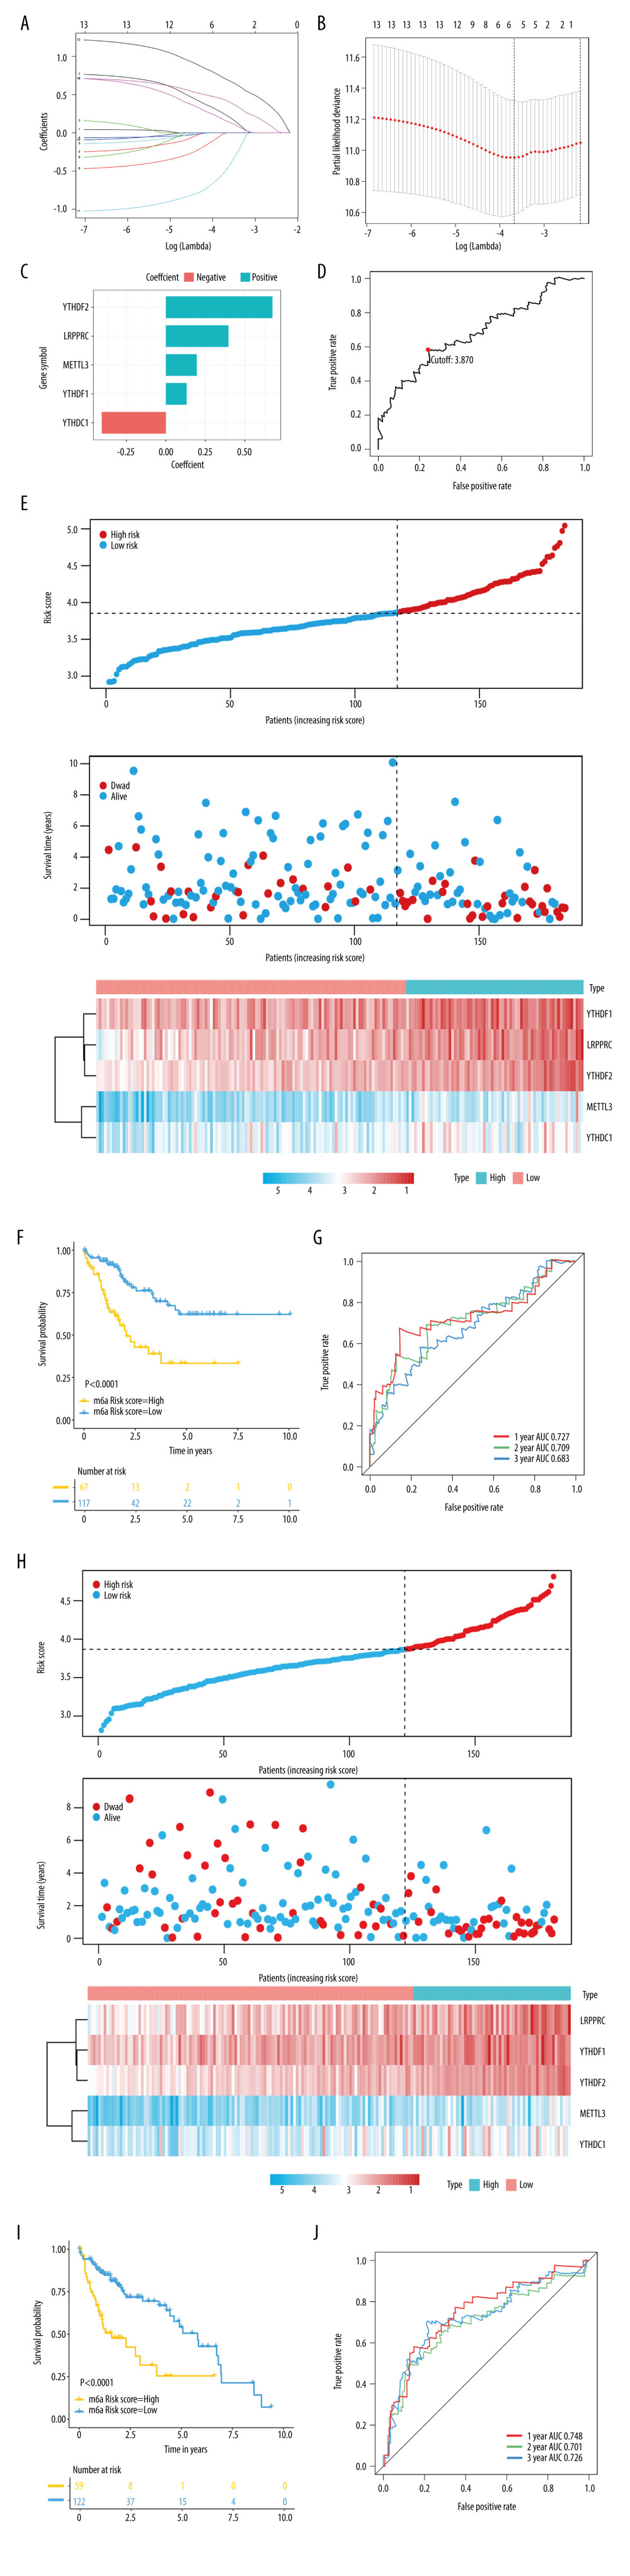 Establishment and validation of the prognostic panel using 5 N6-methyladenosine (m6A) modulators in The Cancer Genome Atlas (TCGA) cohort. (A, B) The least absolute shrinkage and selection operator (LASSO) Cox regression model identified 5 core prognostic m6A modulators in the TCGA training set. (C) The corresponding regression coefficients: YTHDF2, 0.6744; YTHDF1, 0.1318; YTHDC1, −0.4059; METTL3, 0.1954; and LRPPRC: 0.3962. (D) The optimal cutoff point (3.870) could distinguish patients with high and low risk. (E) Risk score distribution and survival overview for patients in the TCGA training set. (F) Prognostic analysis showed that the overall survival of patients was significantly lower in the high-risk score group than the low-risk score group in the TCGA training set. (G) Receiver operating characteristic curve was used to assess the predictive performance of m6A risk score. (H–J) The predictive performance of the m6A risk score was validated in the TCGA testing. R (version 3.6.1) software was used to create the pictures.